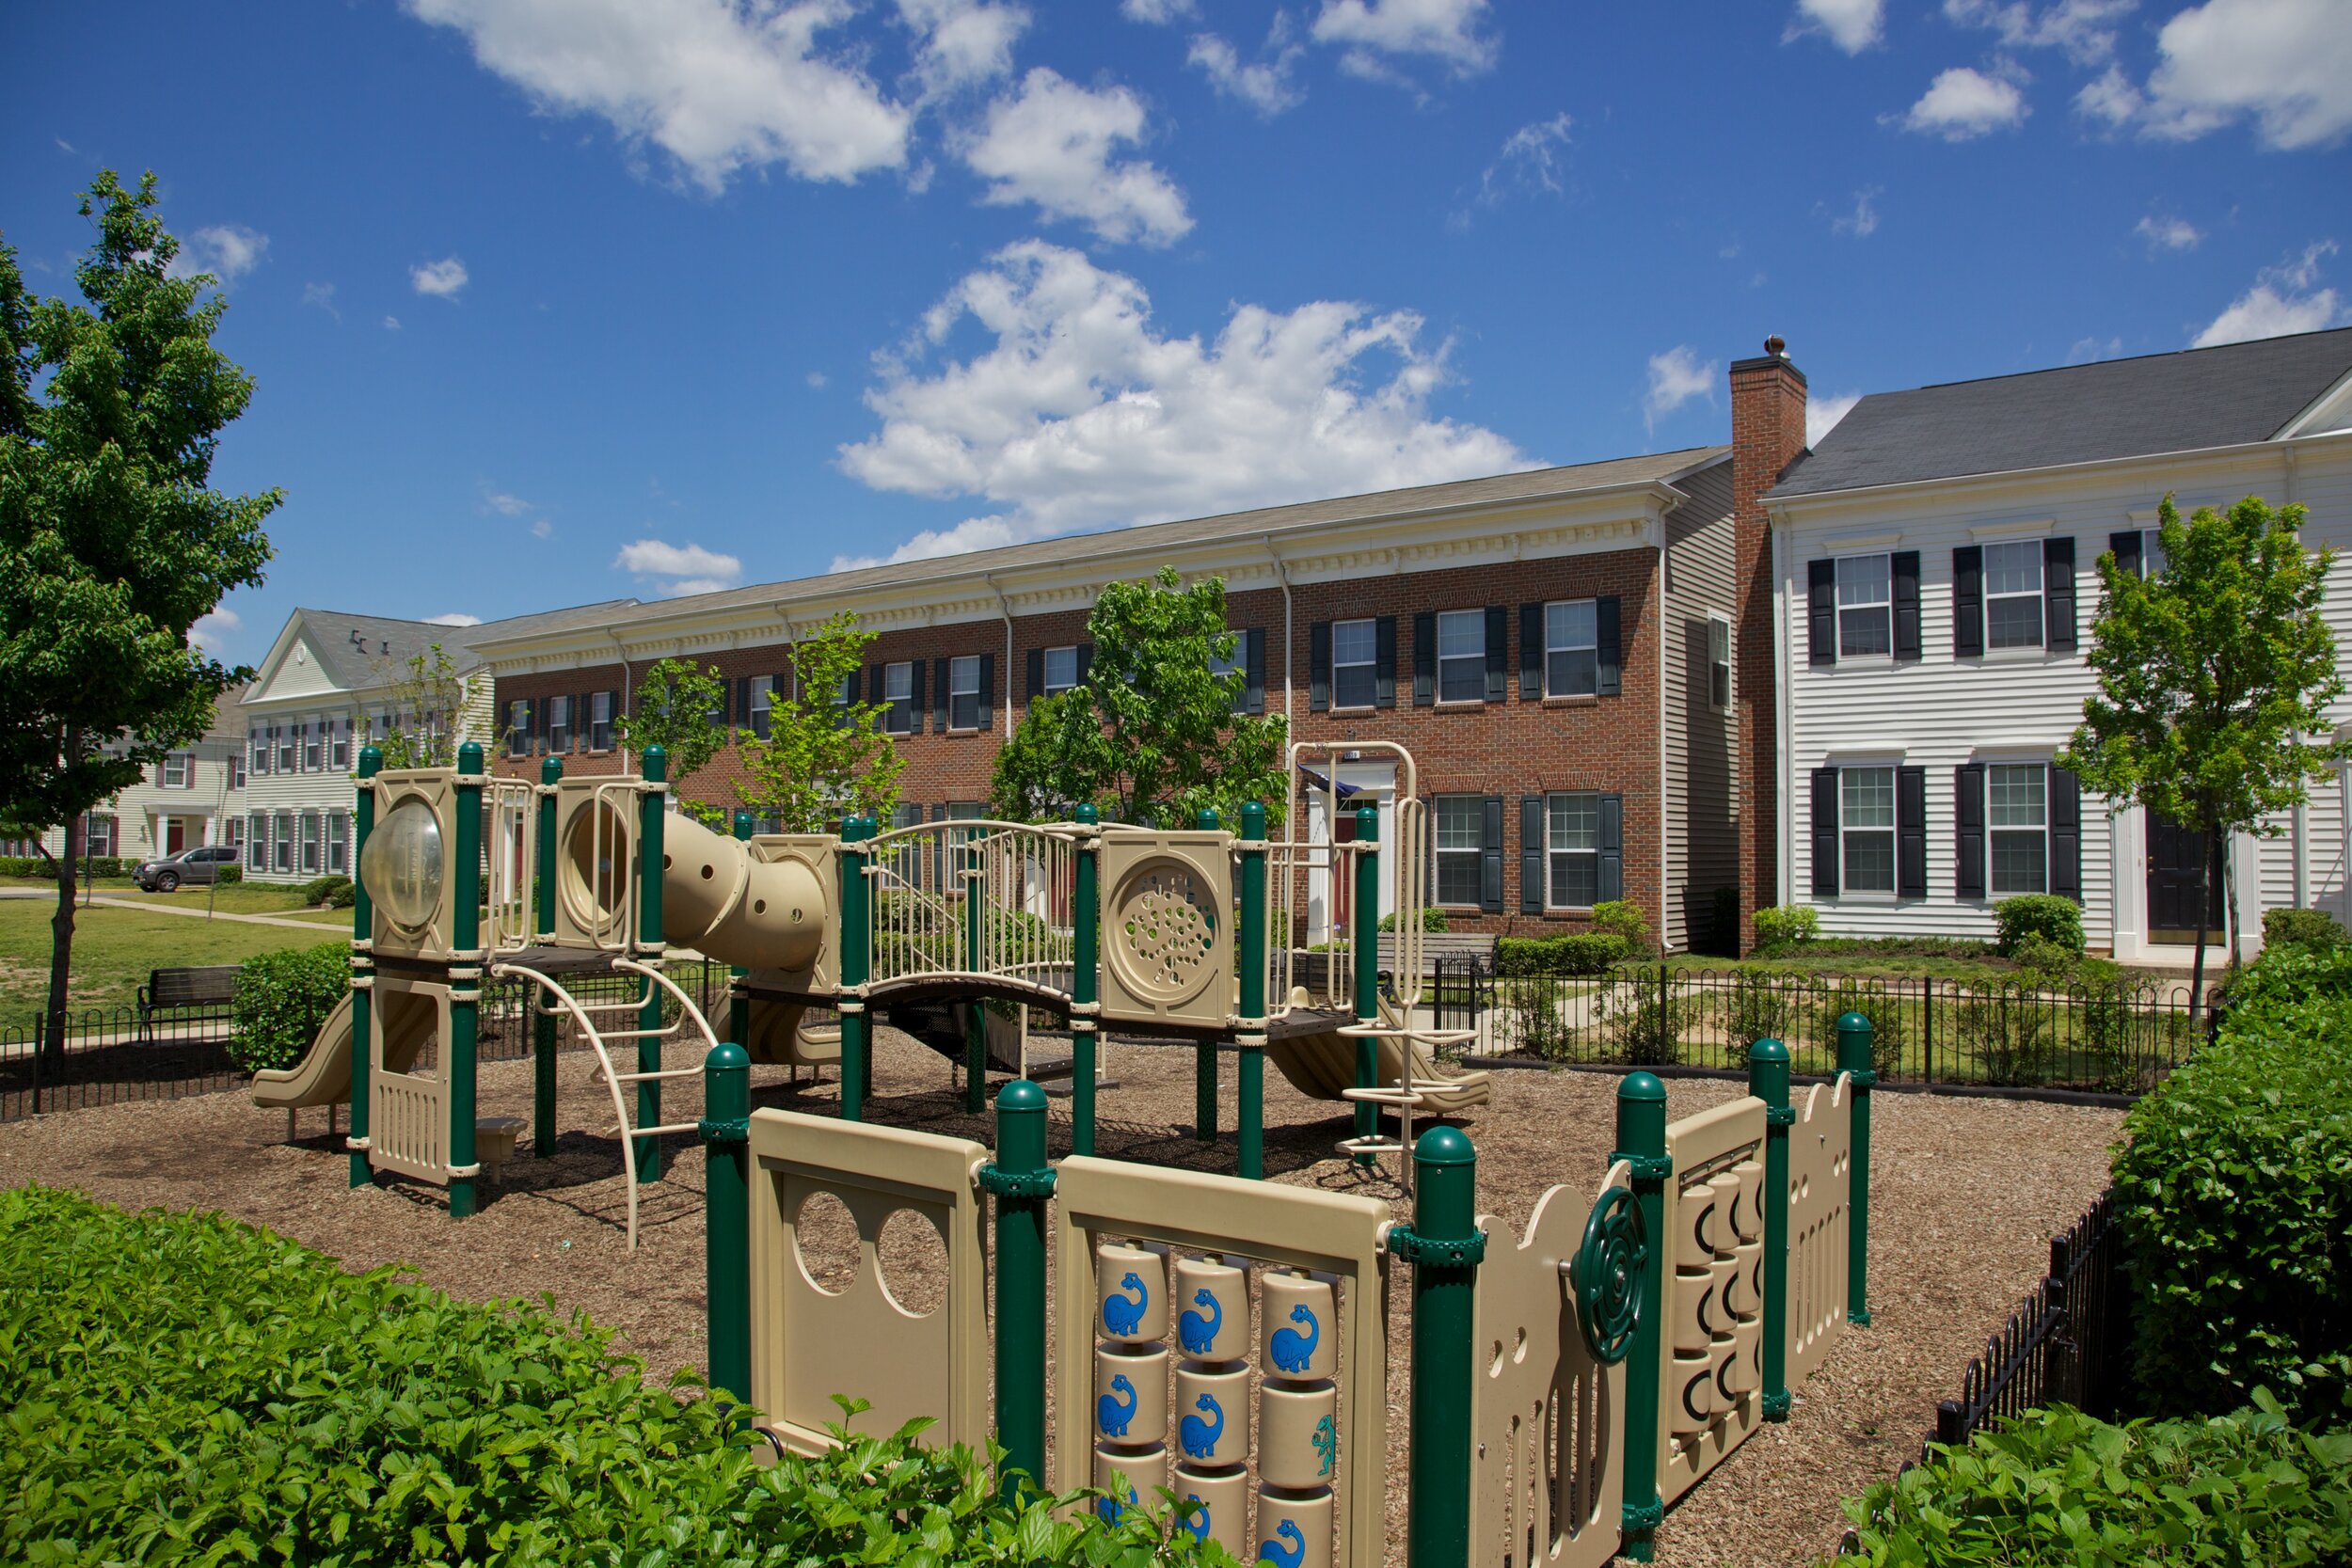 The jungle gym is one of the numerous community amenities at Belvoir. 